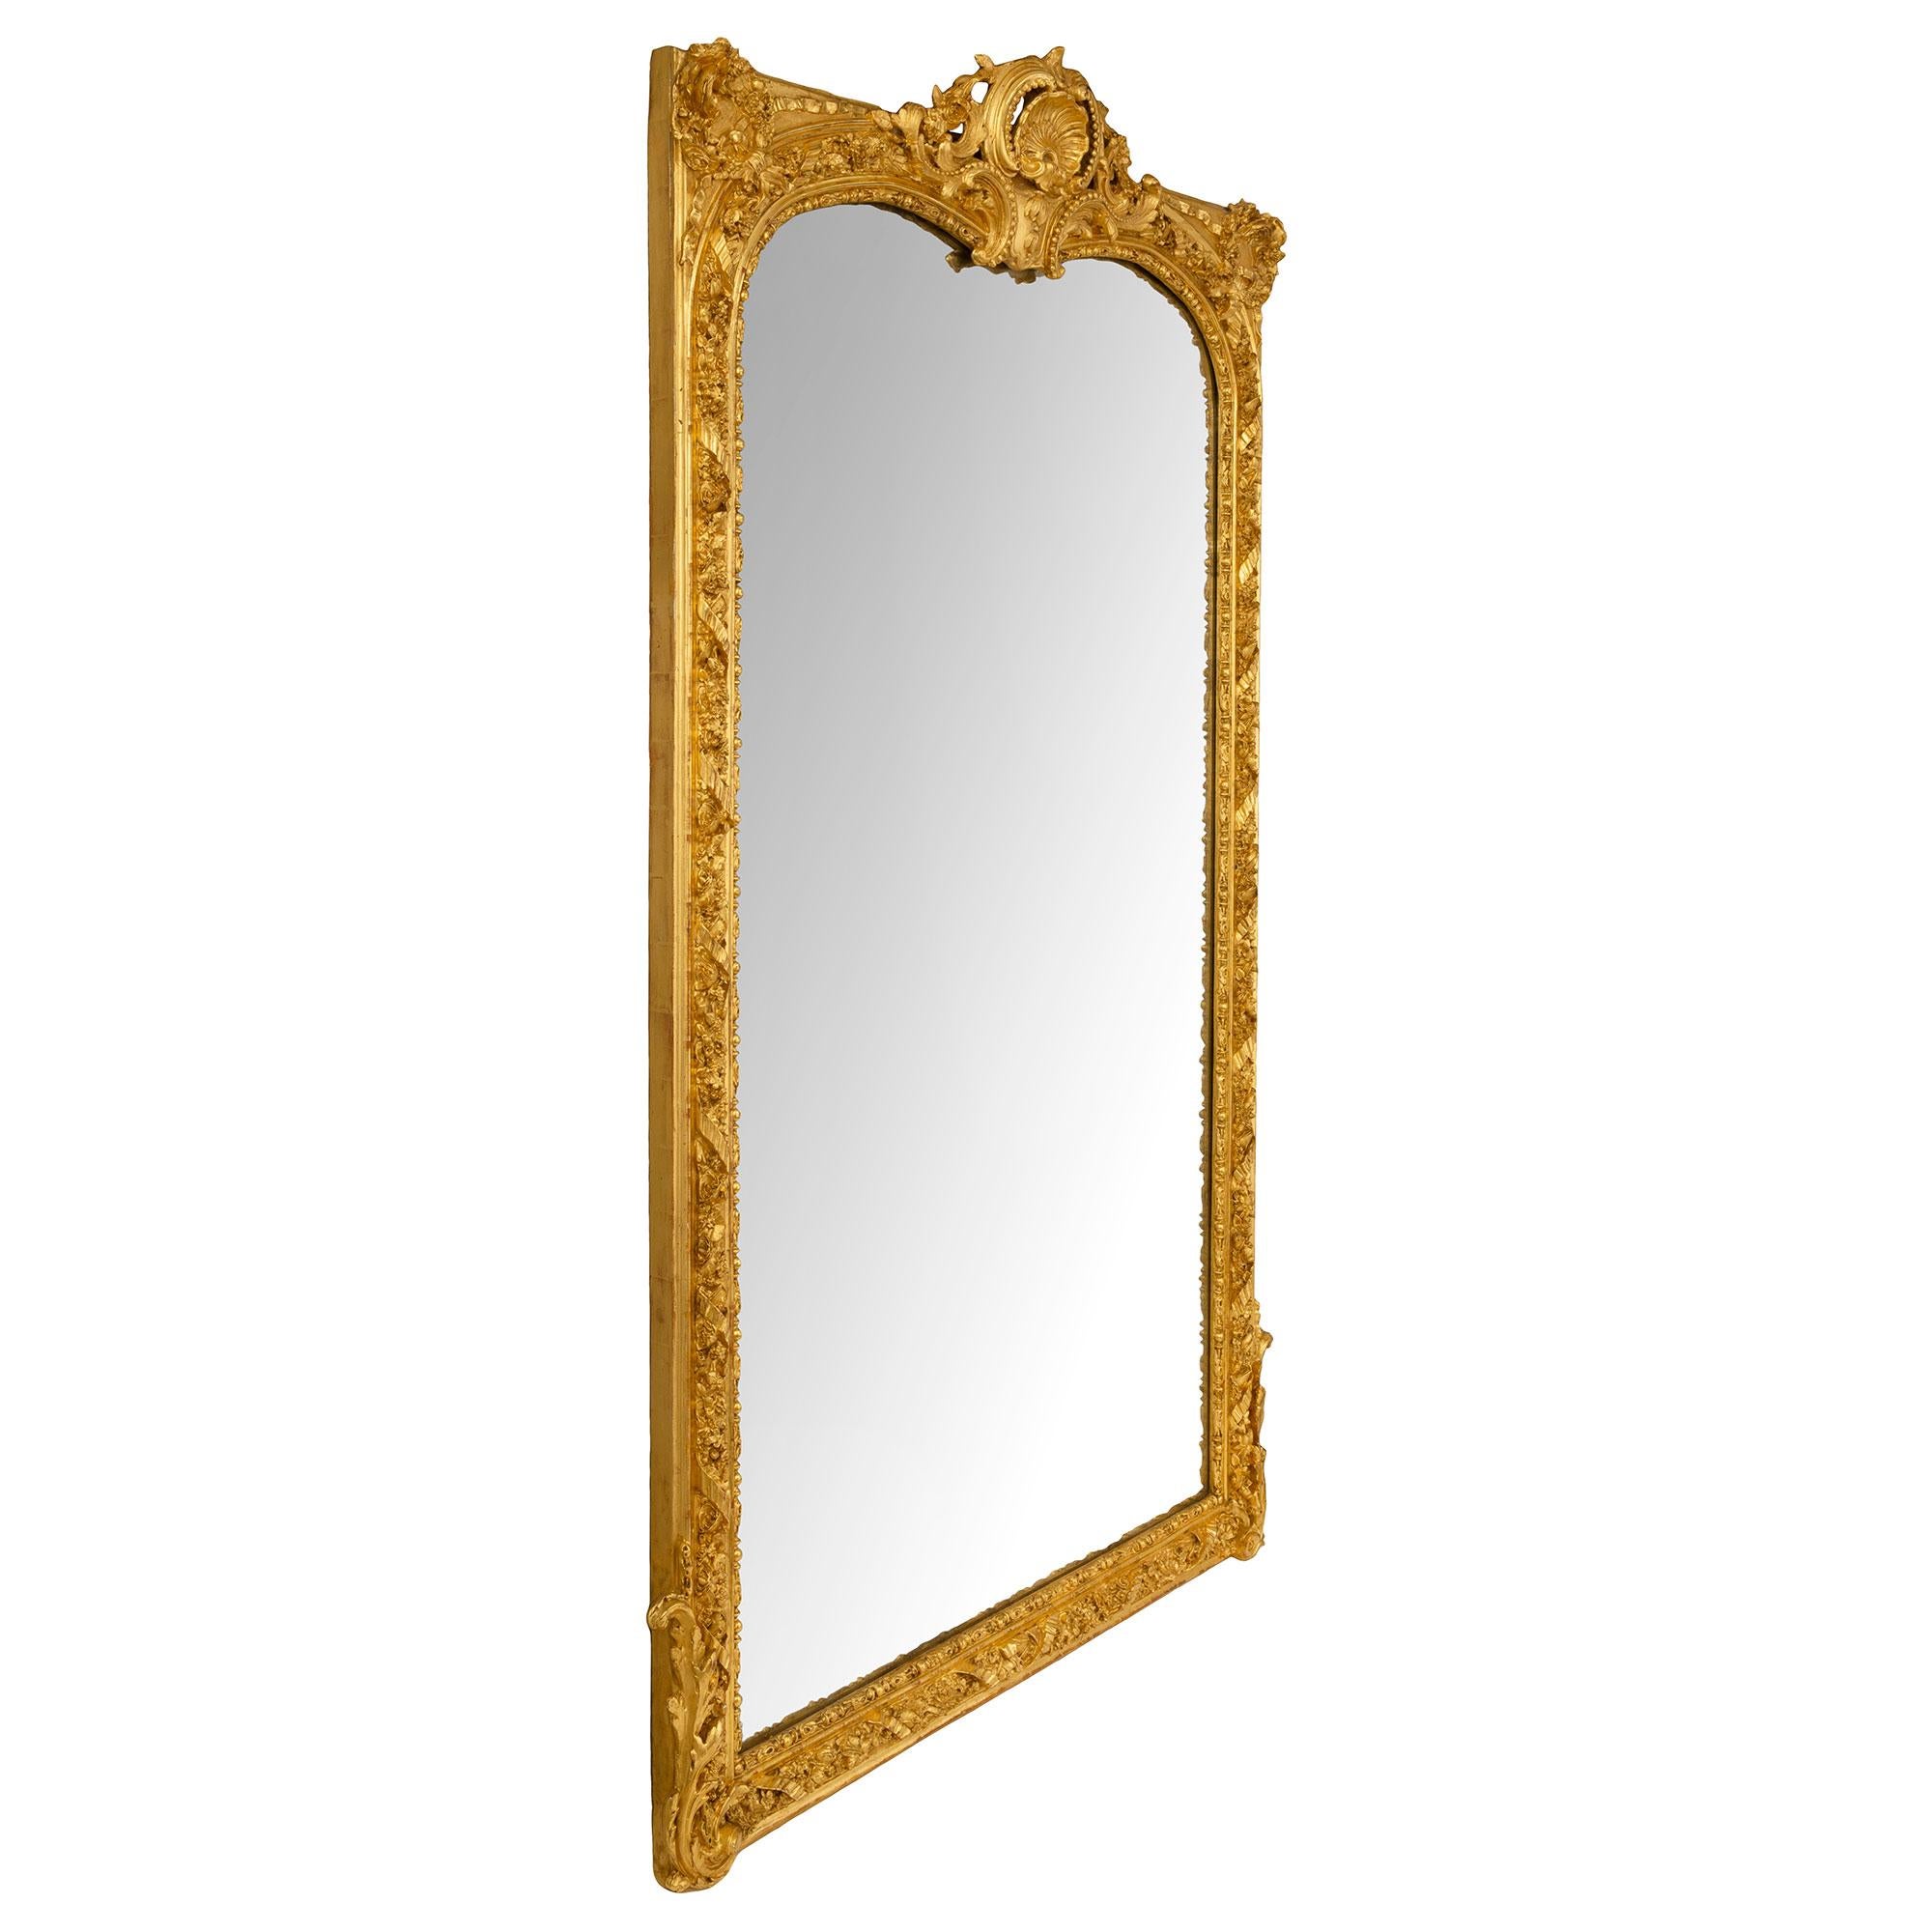 French Early 19th Century Louis XVI Style Giltwood Mirror, circa 1830 In Good Condition For Sale In West Palm Beach, FL